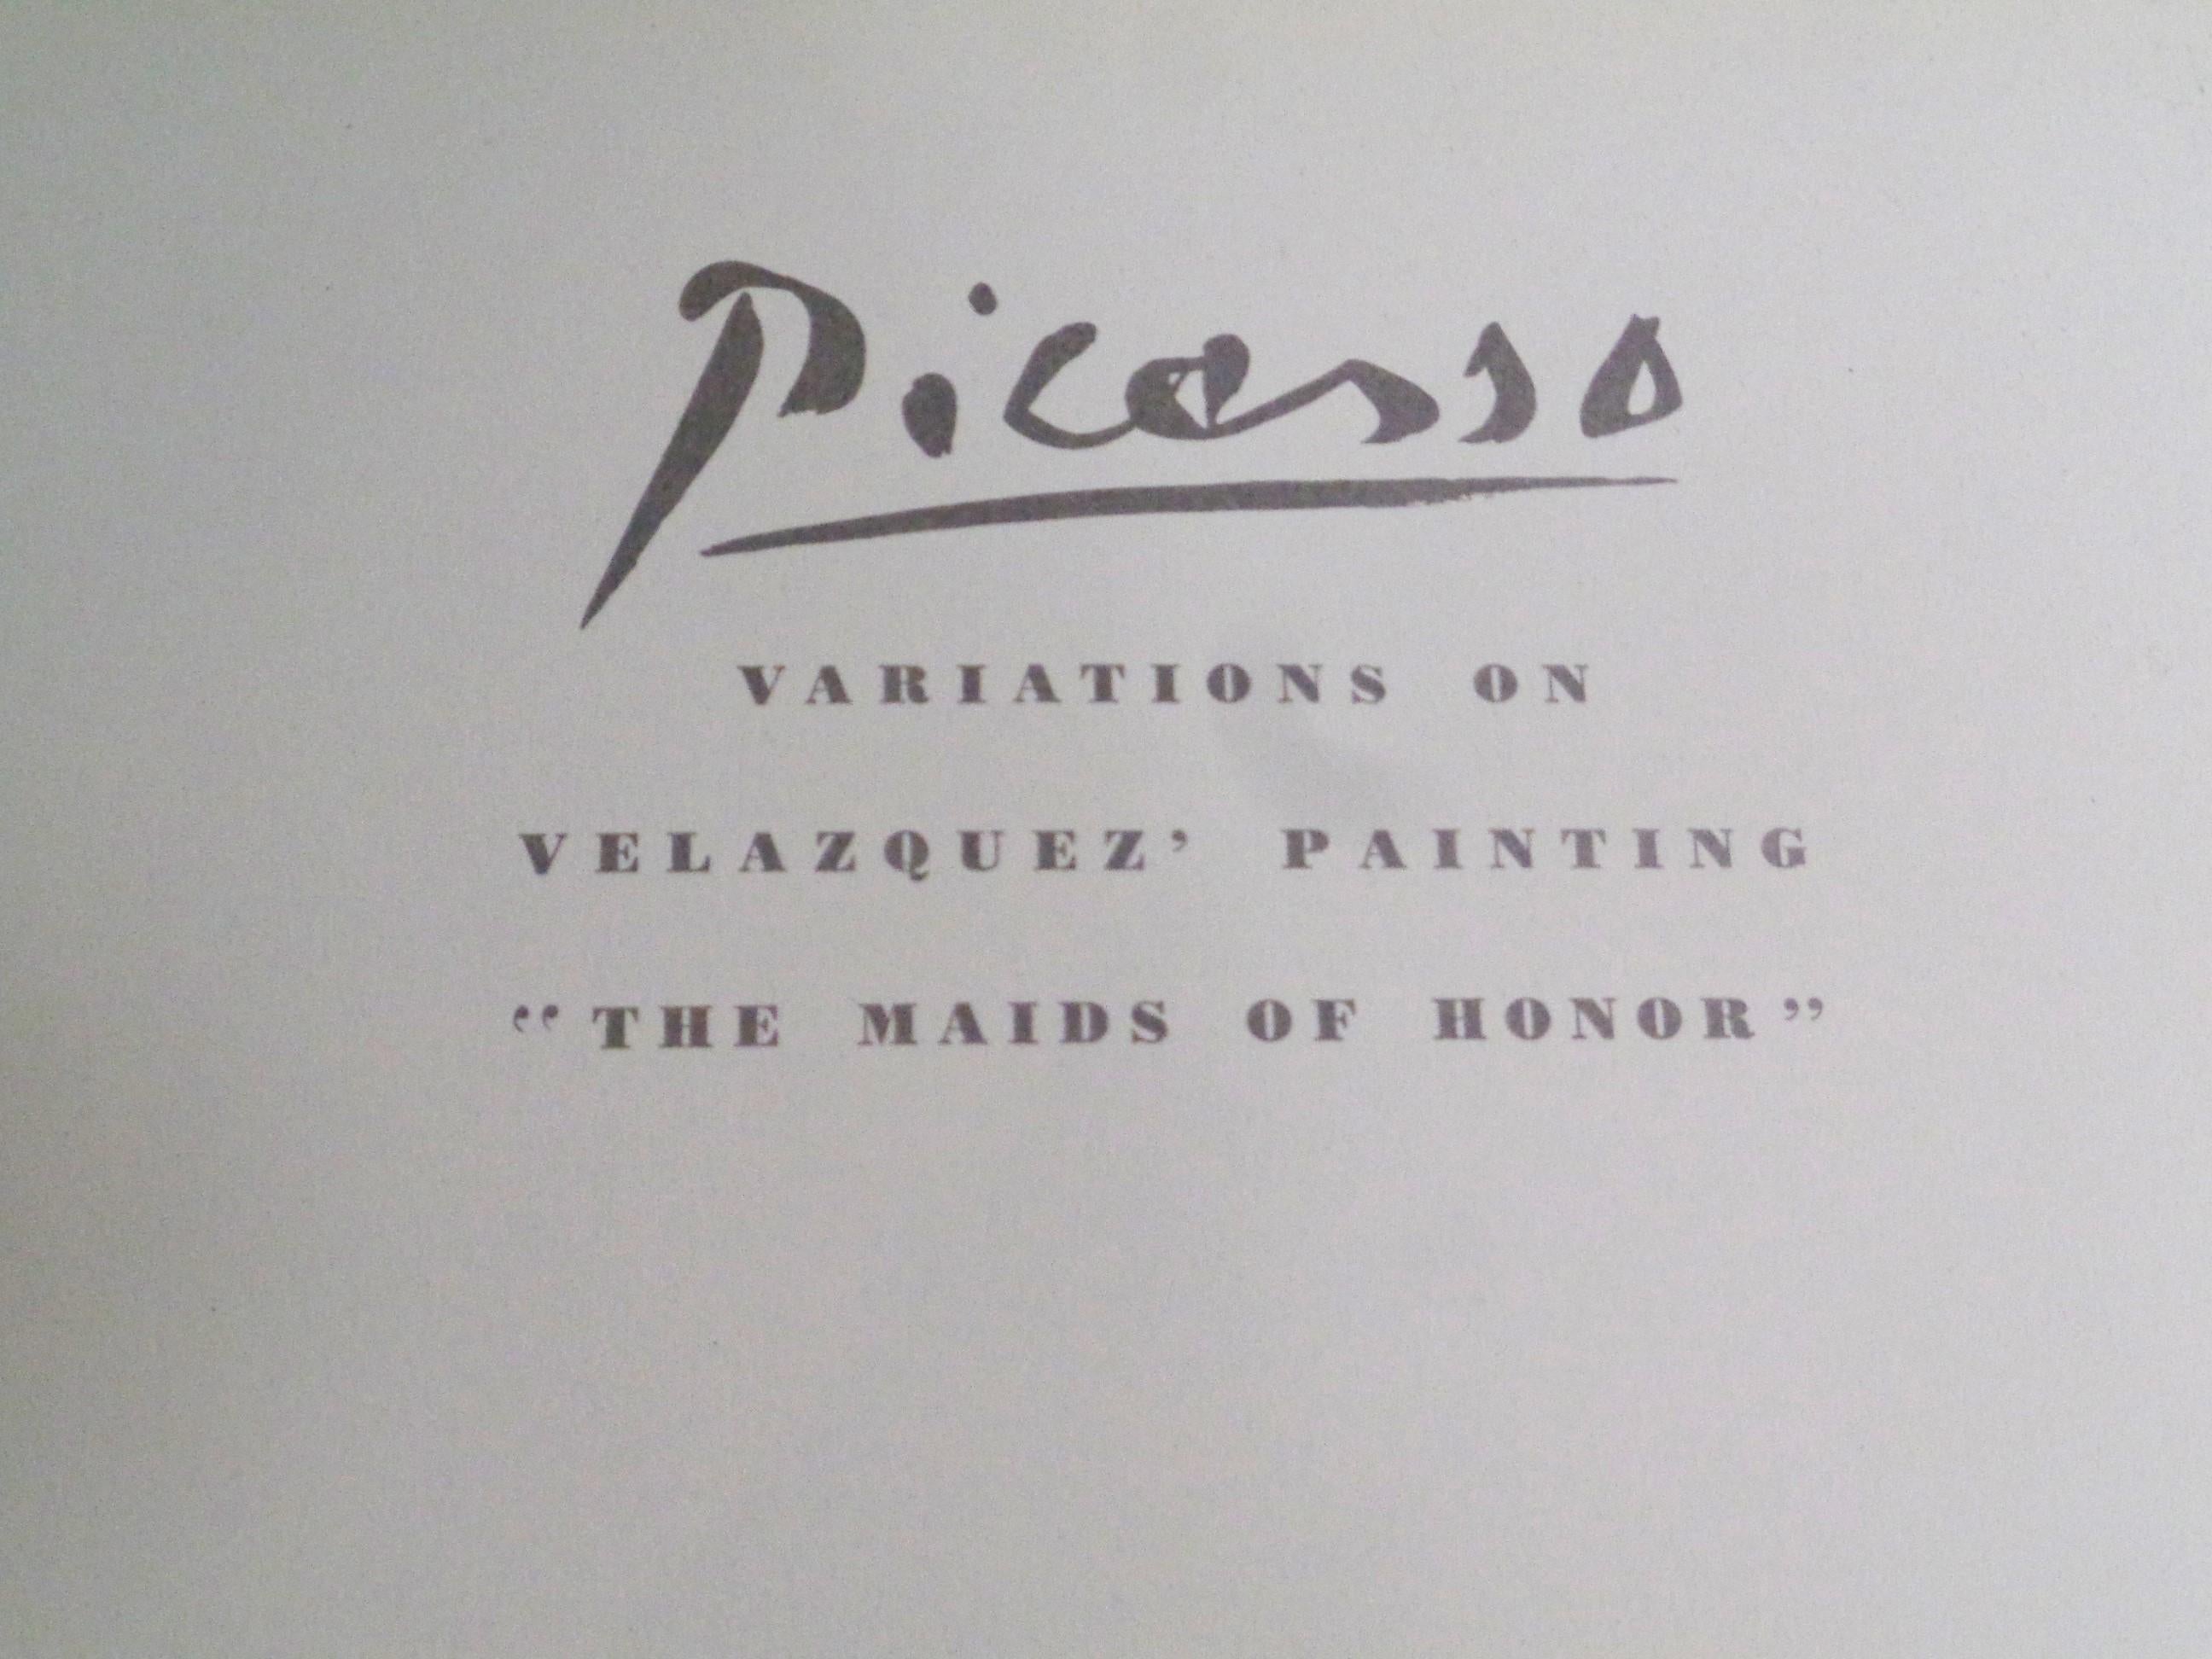 Picasso's Variations on Velazquez Painting 